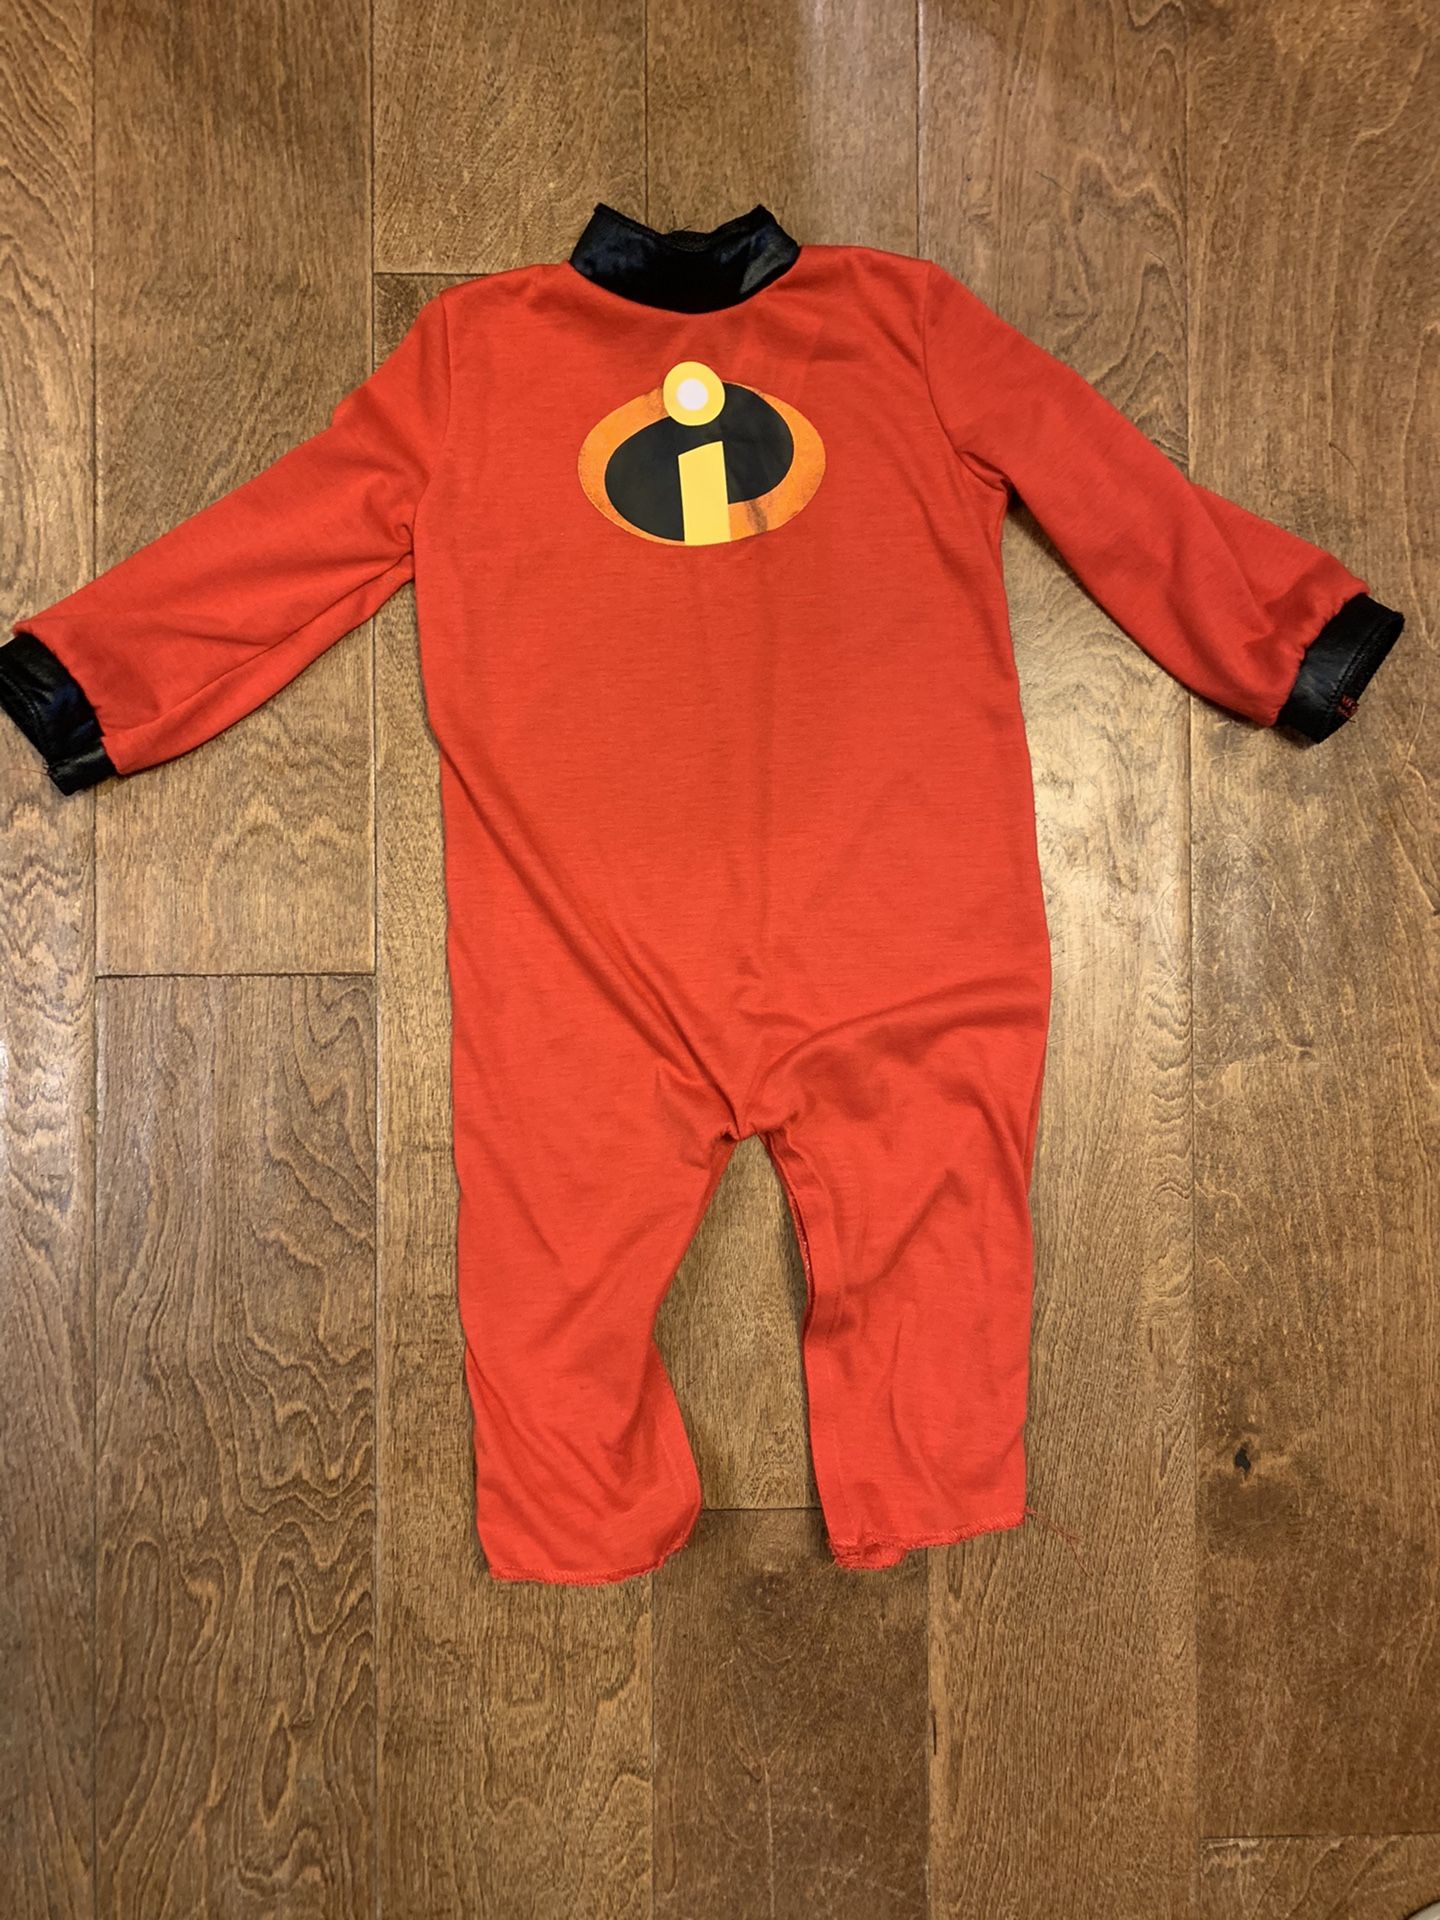 Infant incredibles costume